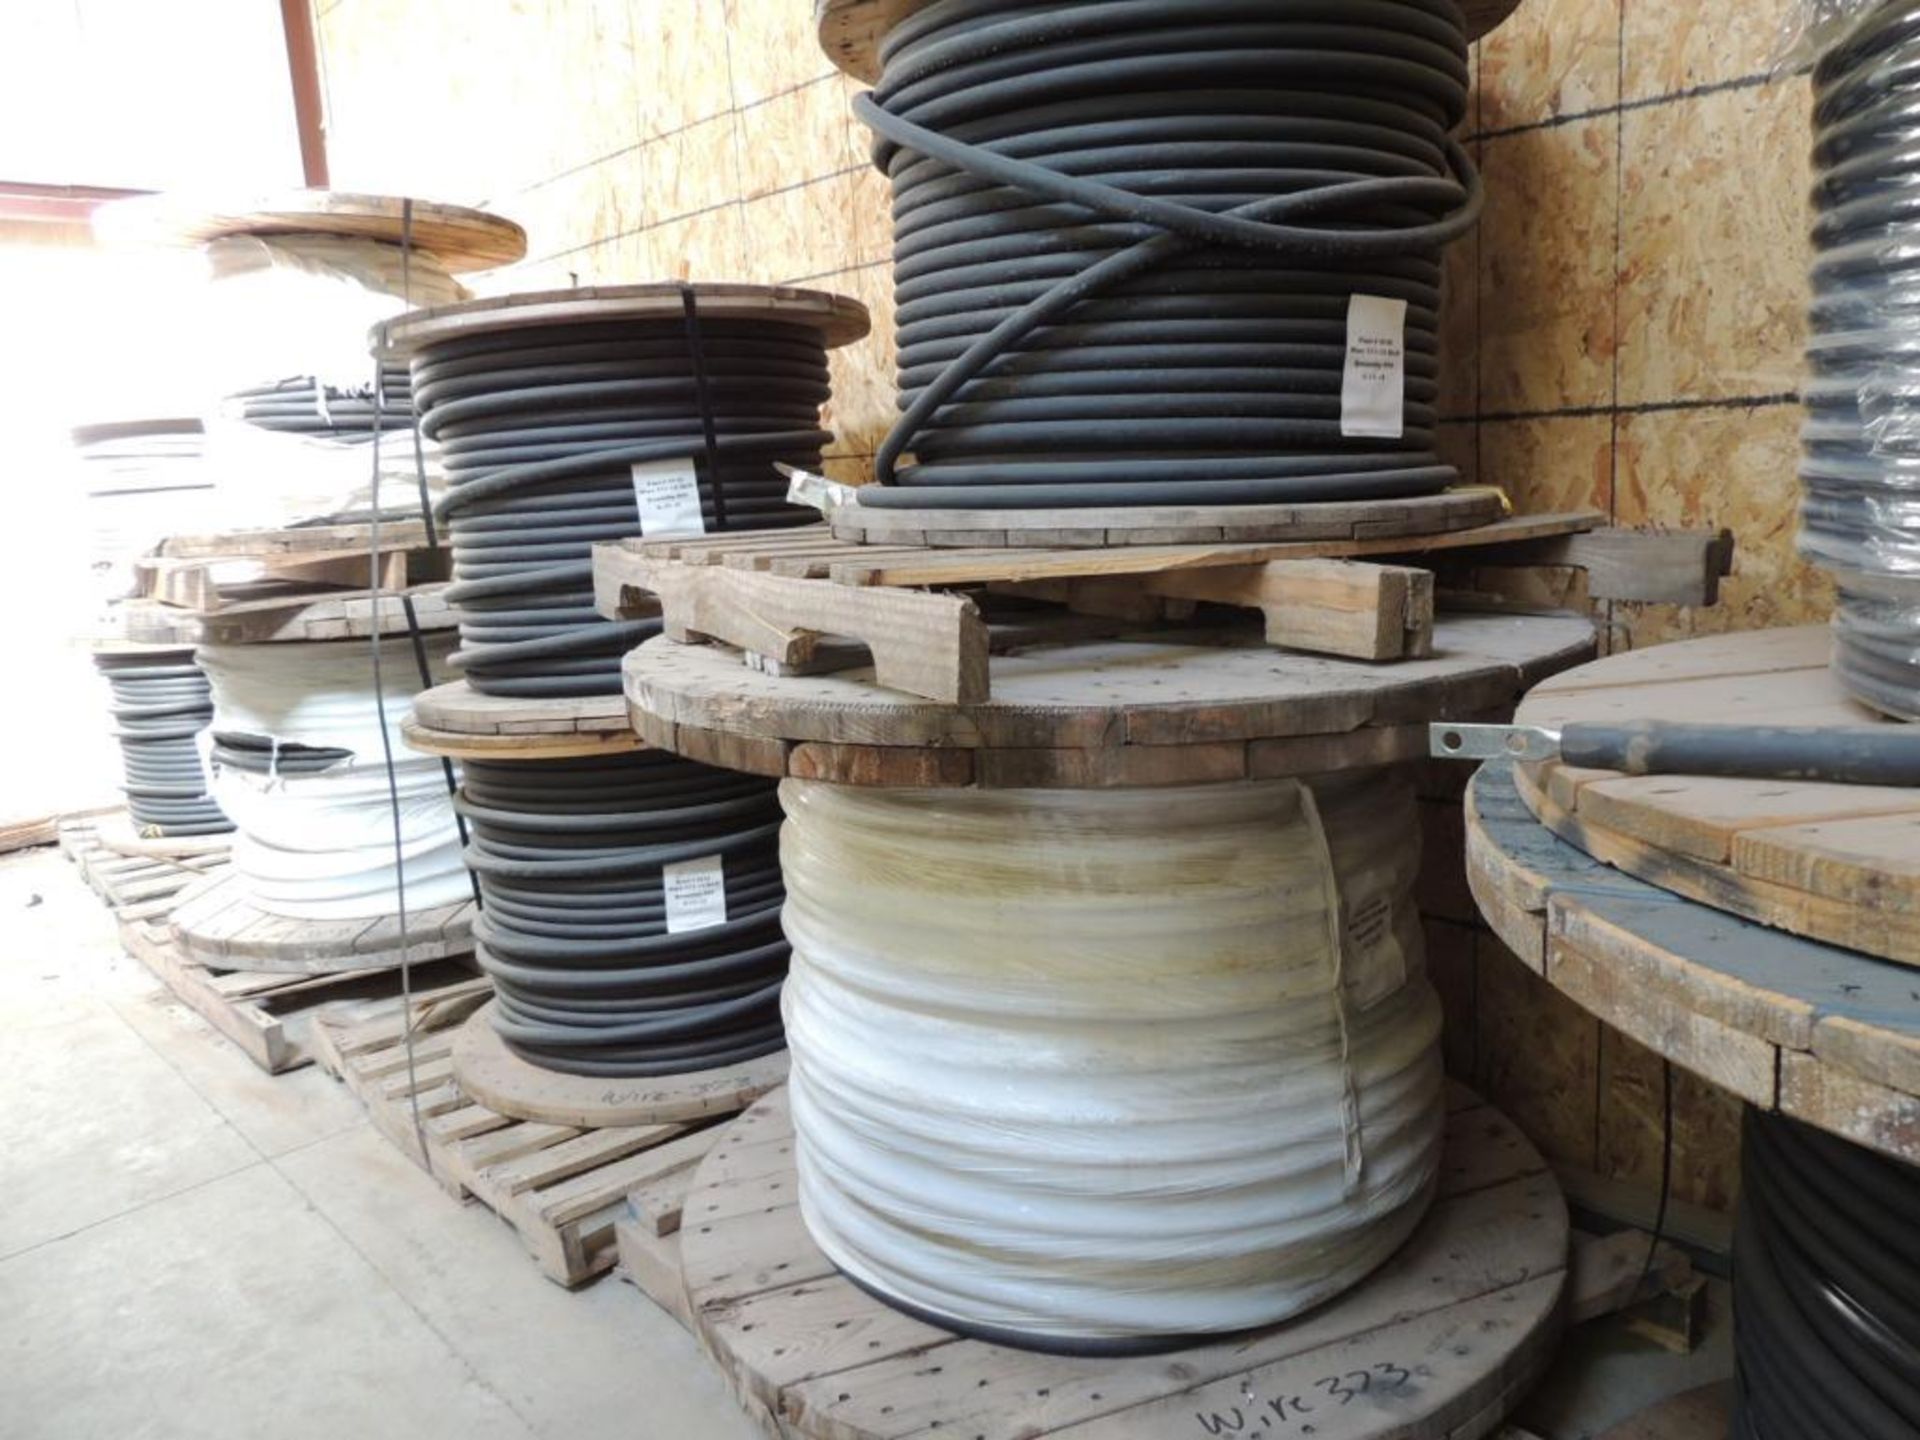 LOT: (13) Spools General Cable 373-DLO 1 Conductor, Approx. 8000 ft. - Image 4 of 5